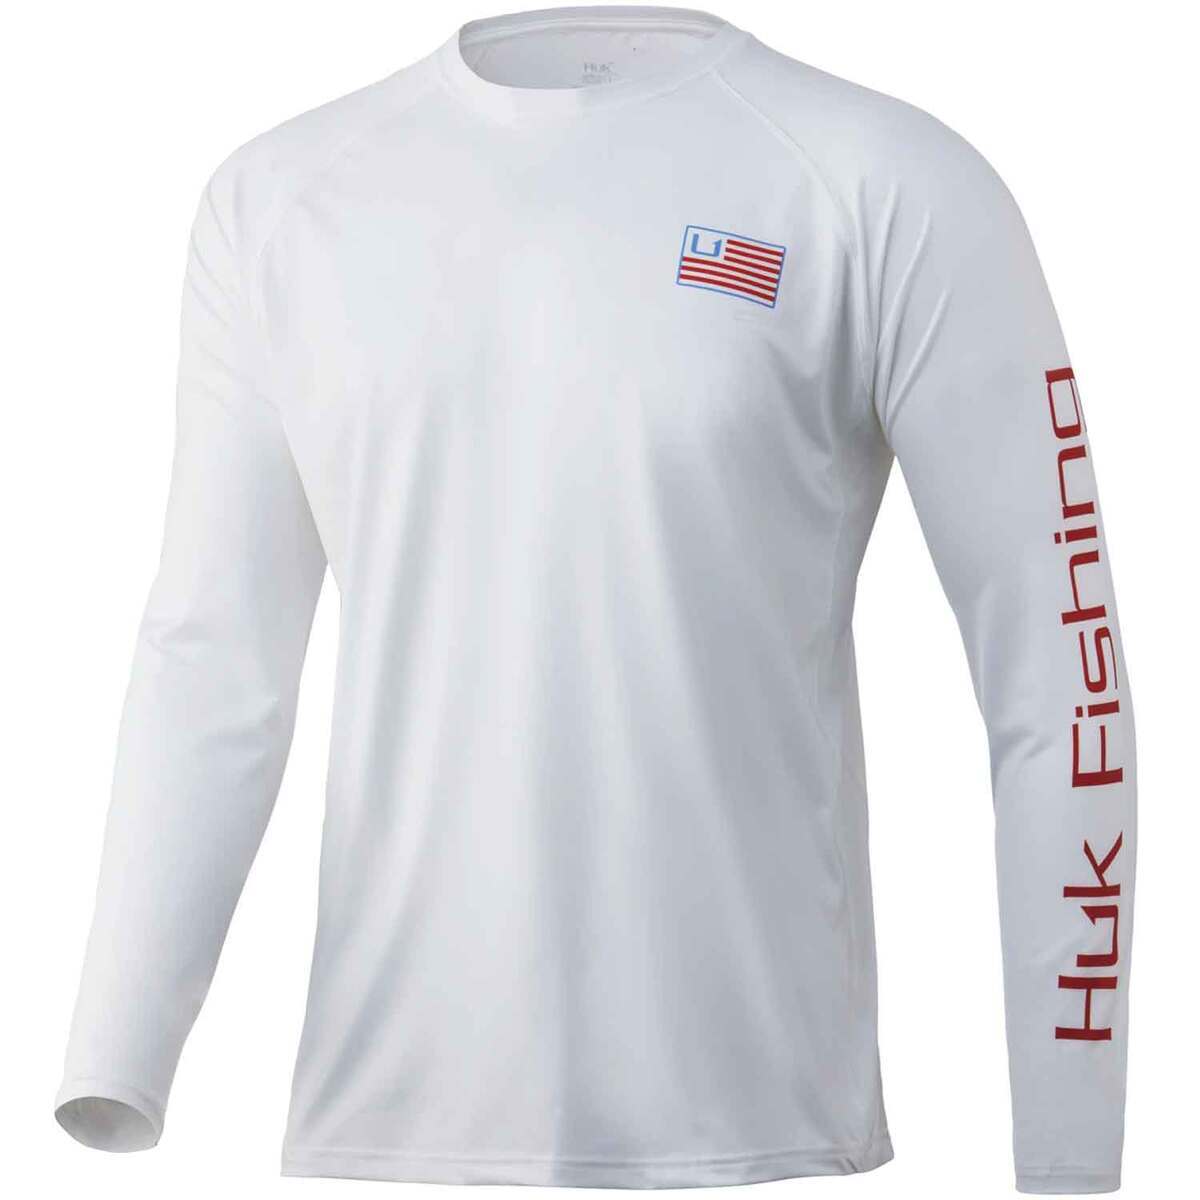 Mountain High Outfitters Men's Huk & Rope Pursuit Long Sleeve